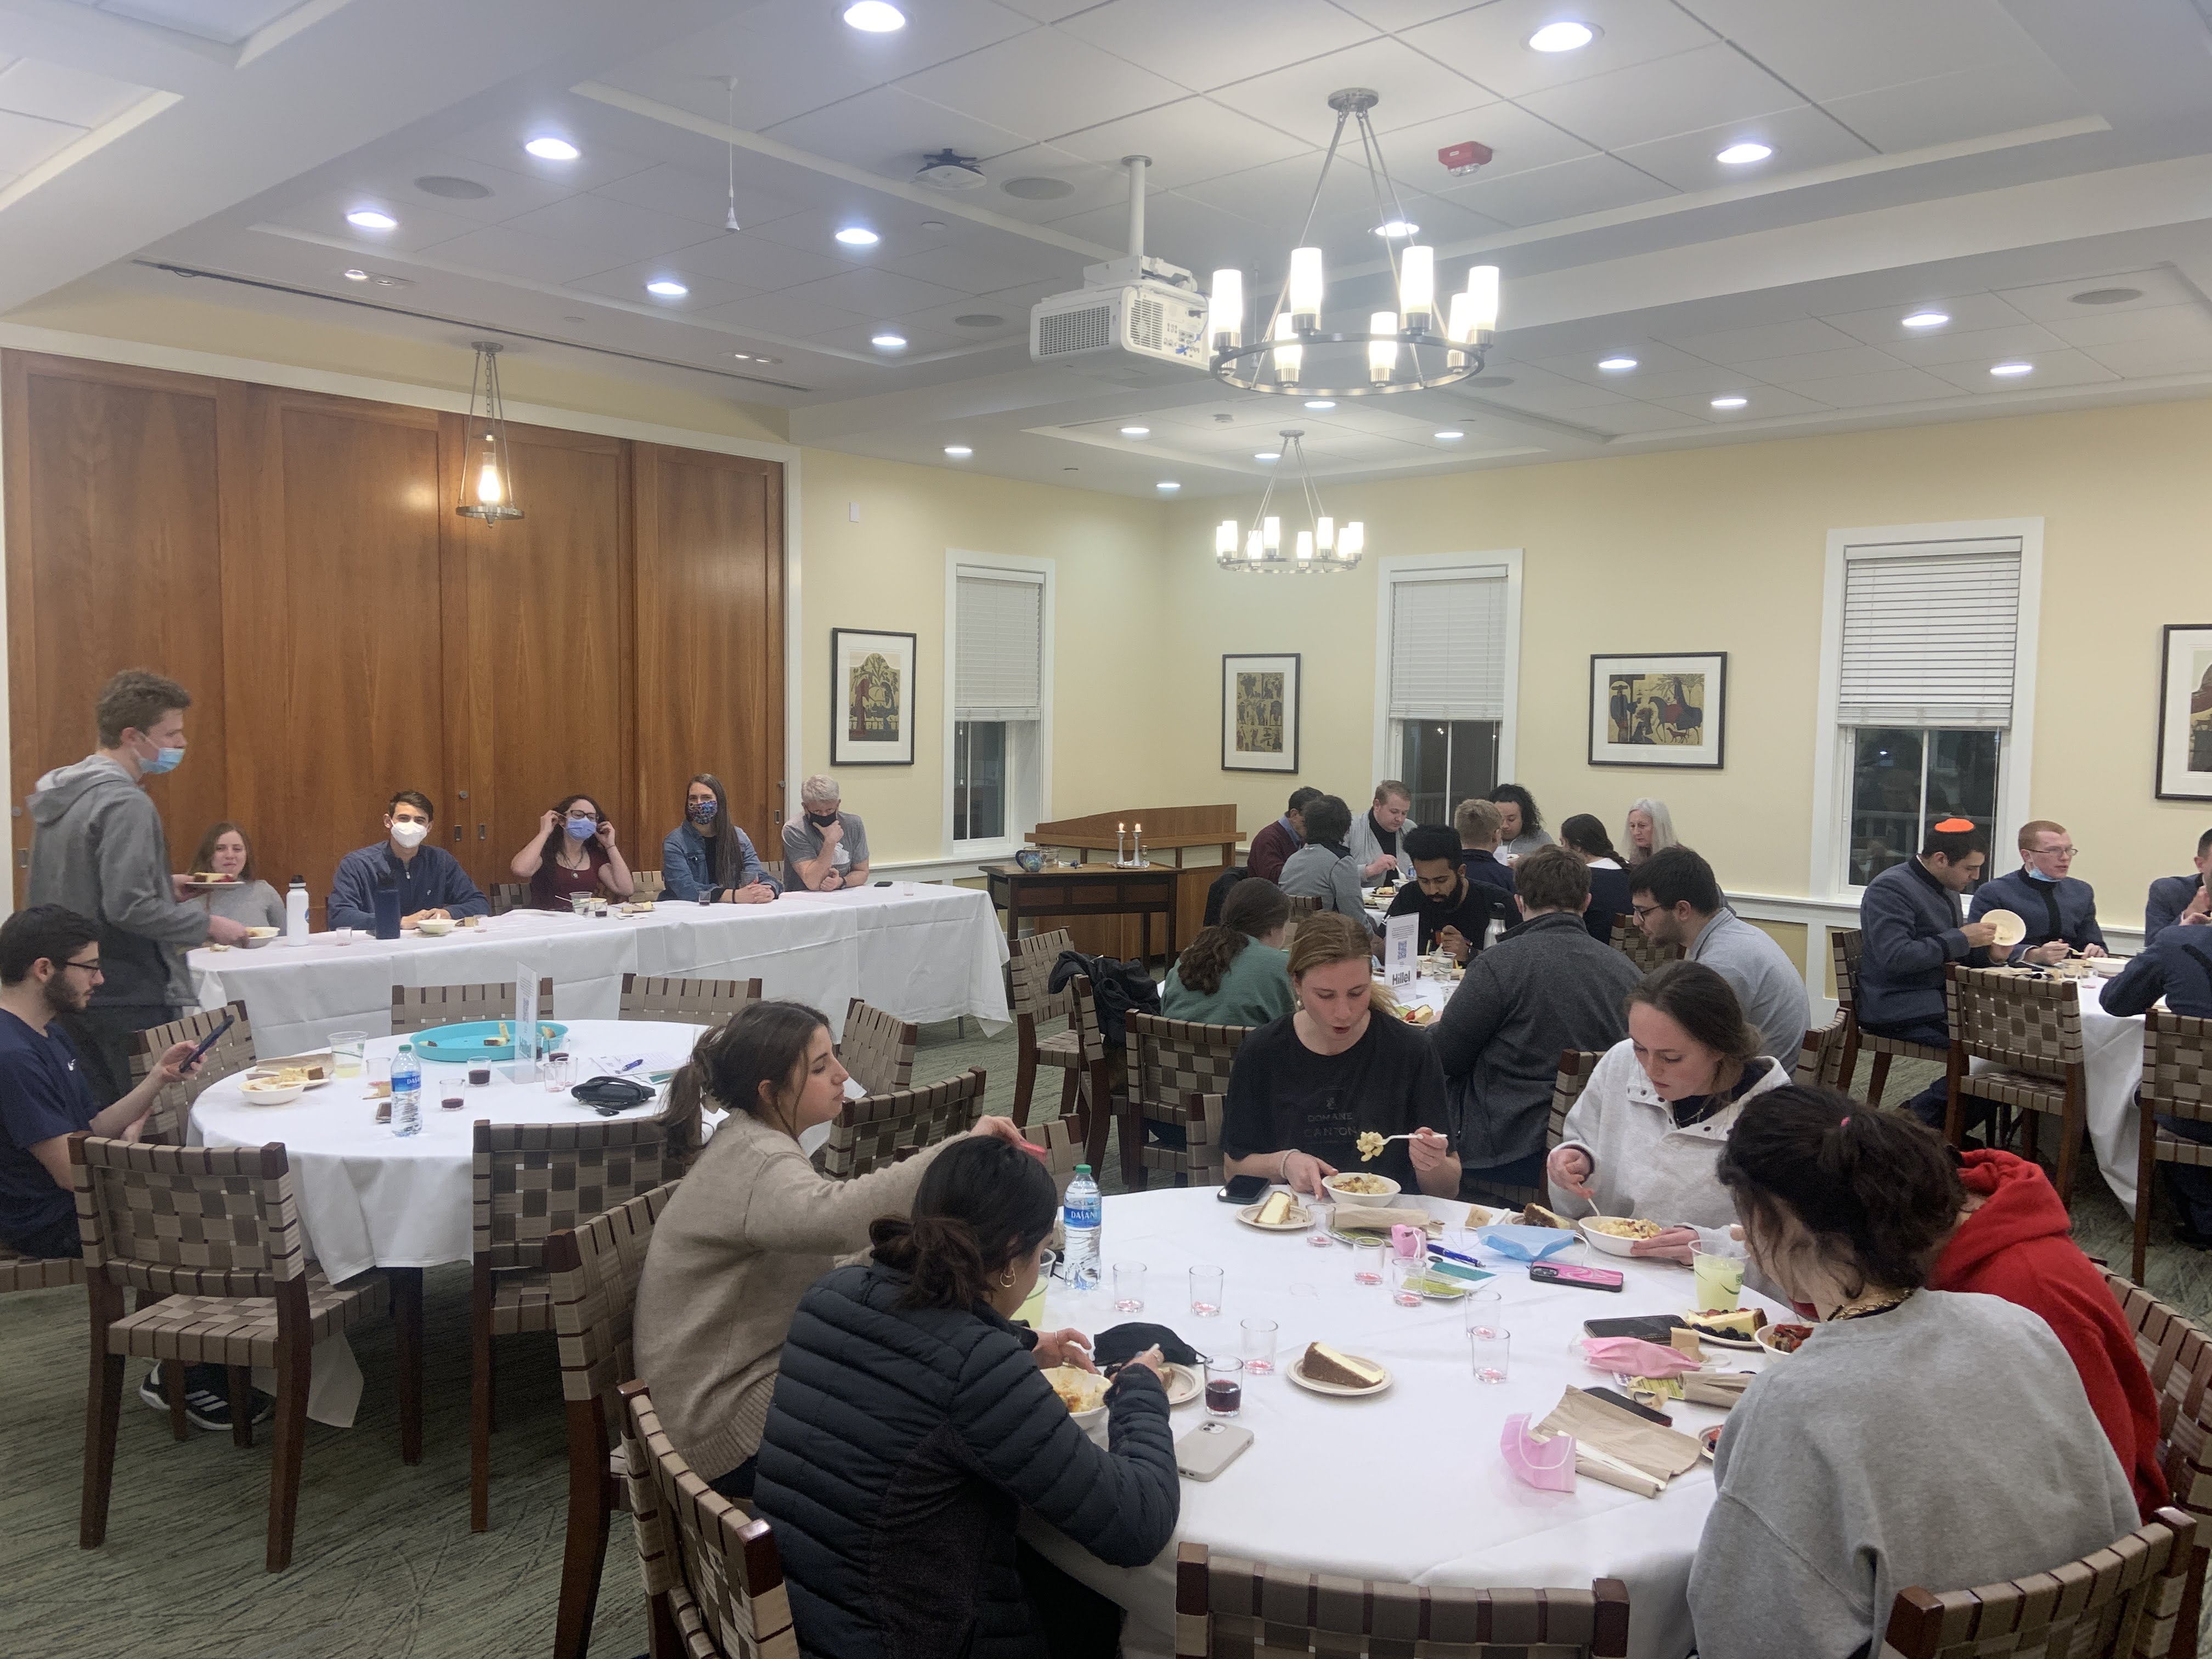 Students gather for Cheesy Love Shabbat, where a panel discusses interfaith relationships over macaroni and cheese and cheesecake.